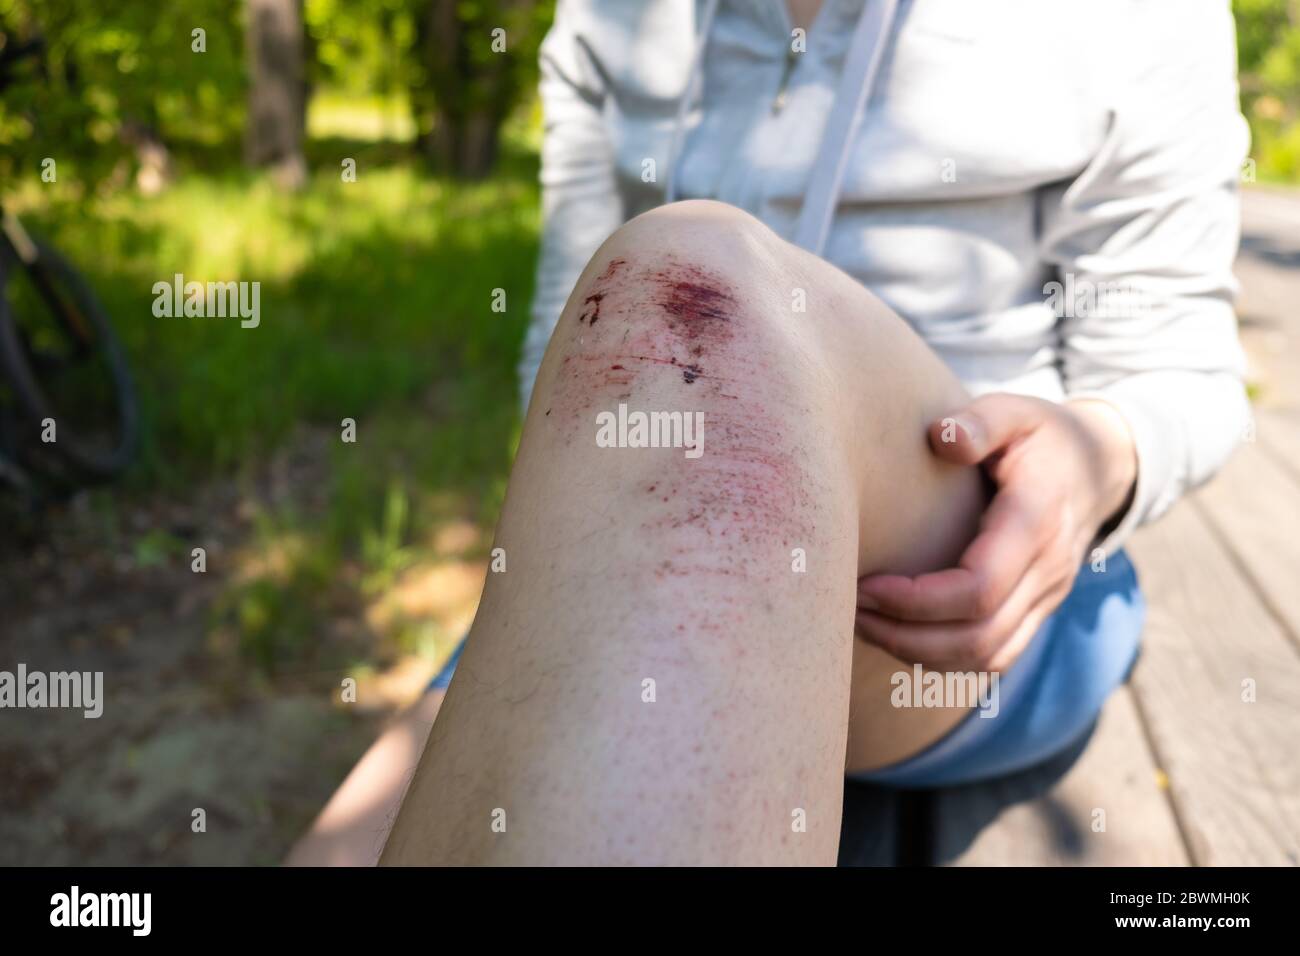 Injury to the legs during outdoor activities, jogging, cycling. An open,  bleeding wound to the leg with peeled skin, bruises and bruises. Accident  Stock Photo - Alamy